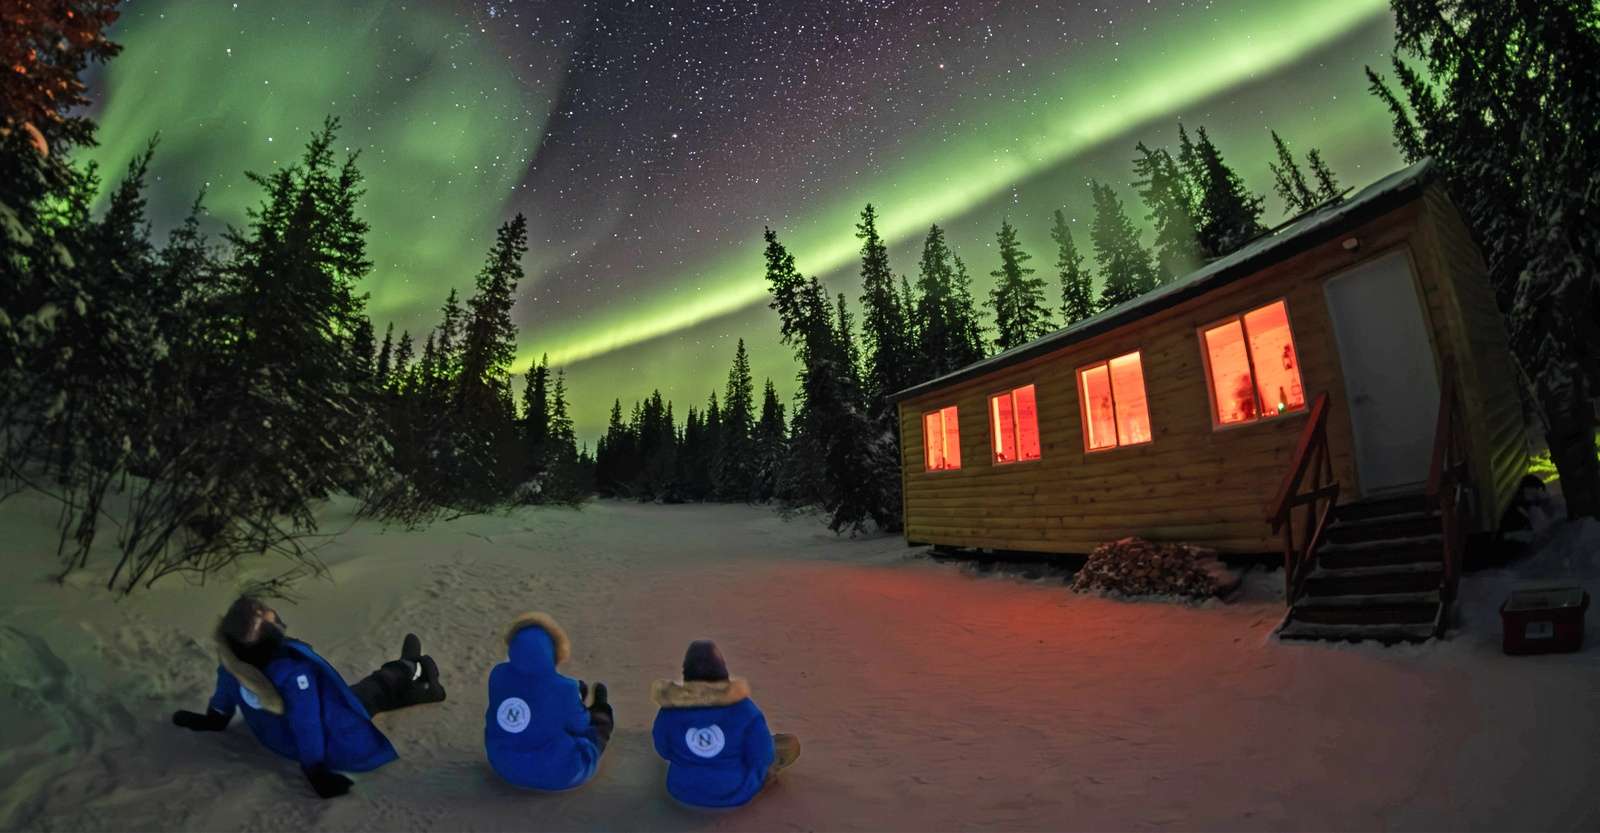 10 Indigenous-led Northern Lights Experiences in Canada